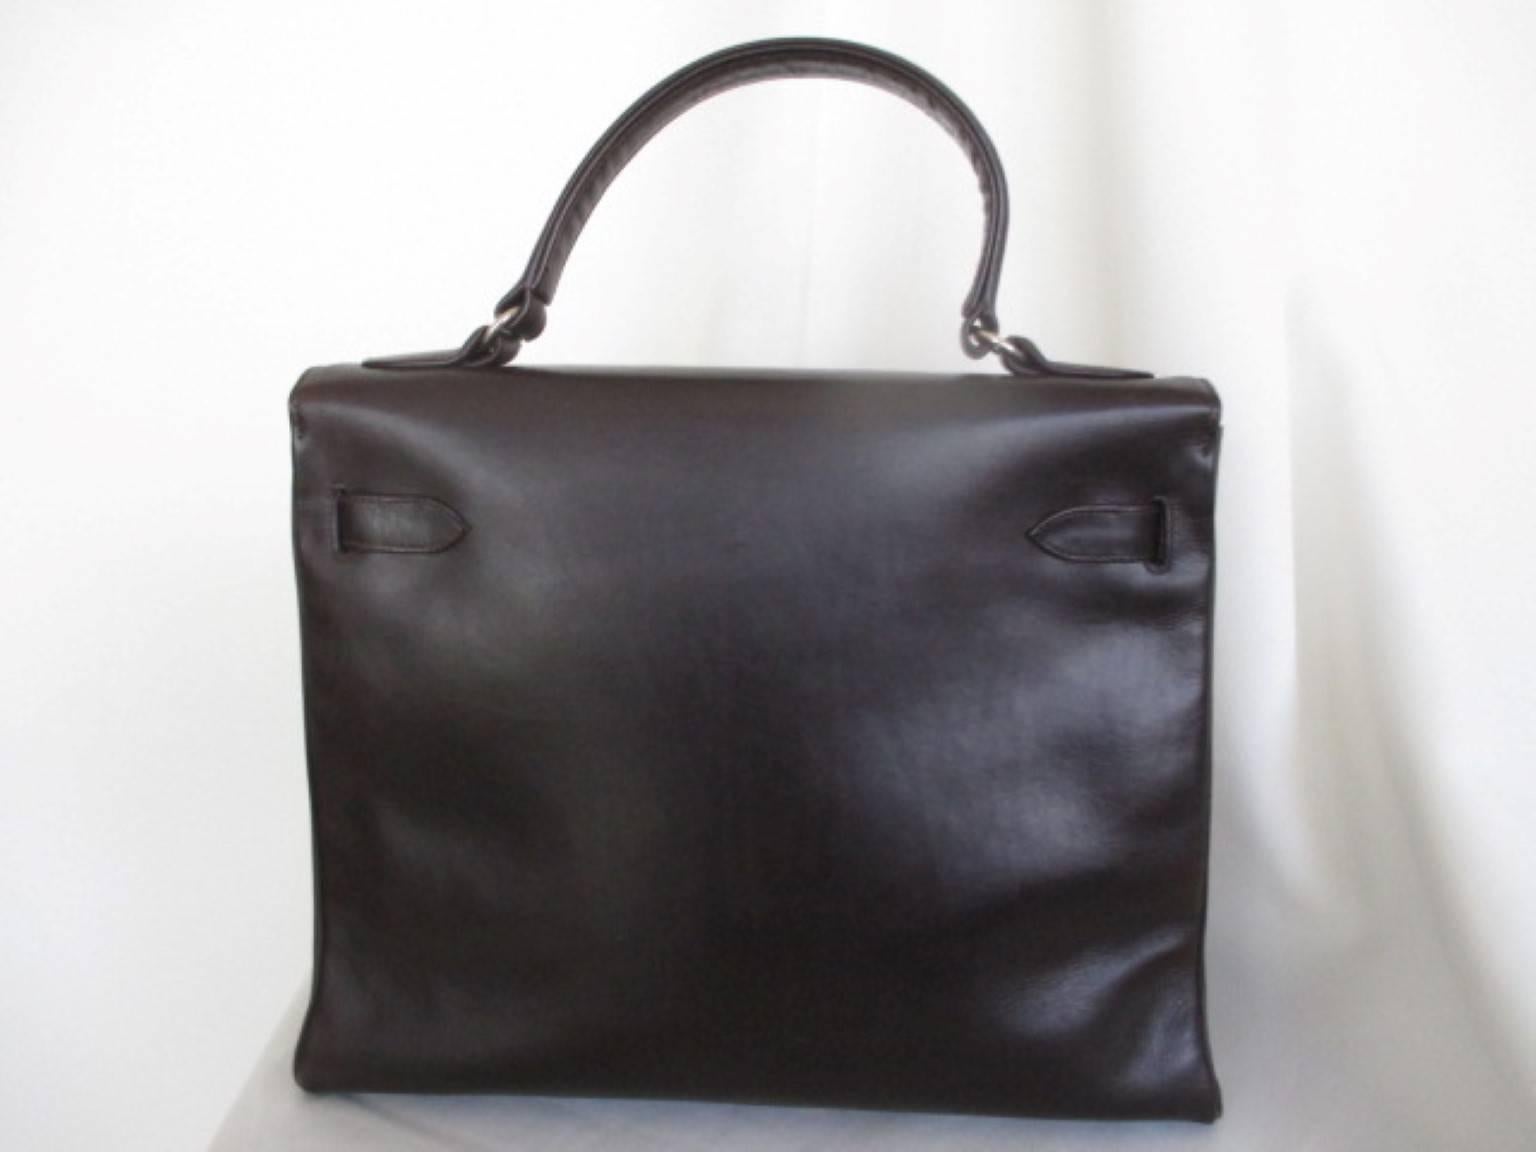 This vintage Kelly style bag is made from soft leather inside and out.

We offer more exclusive vintage items, view our frontstore

The interior has 1 zipper pocket and 2 side pockets.
It has gold hardware with some wear.
The condition of the